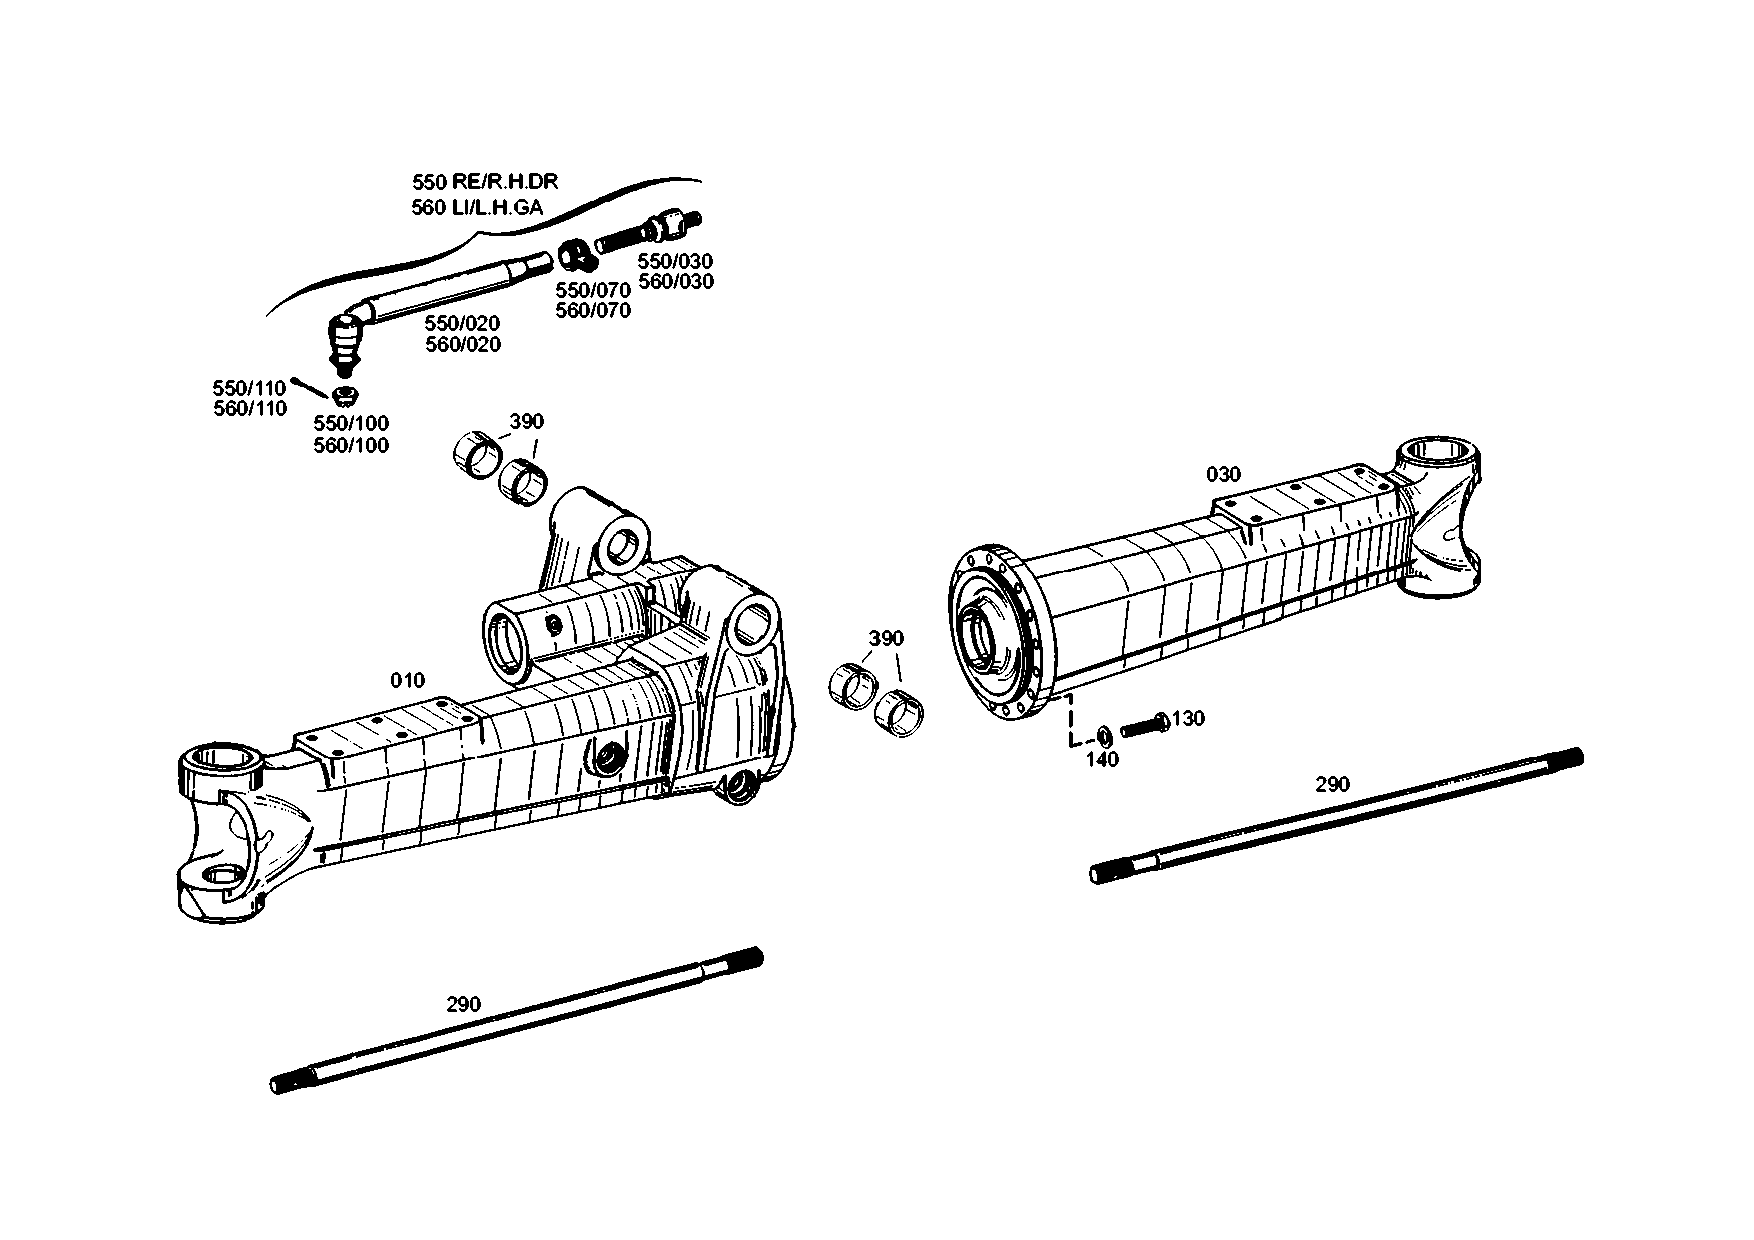 drawing for LIEBHERR GMBH 5007516 - TIE ROD (figure 2)